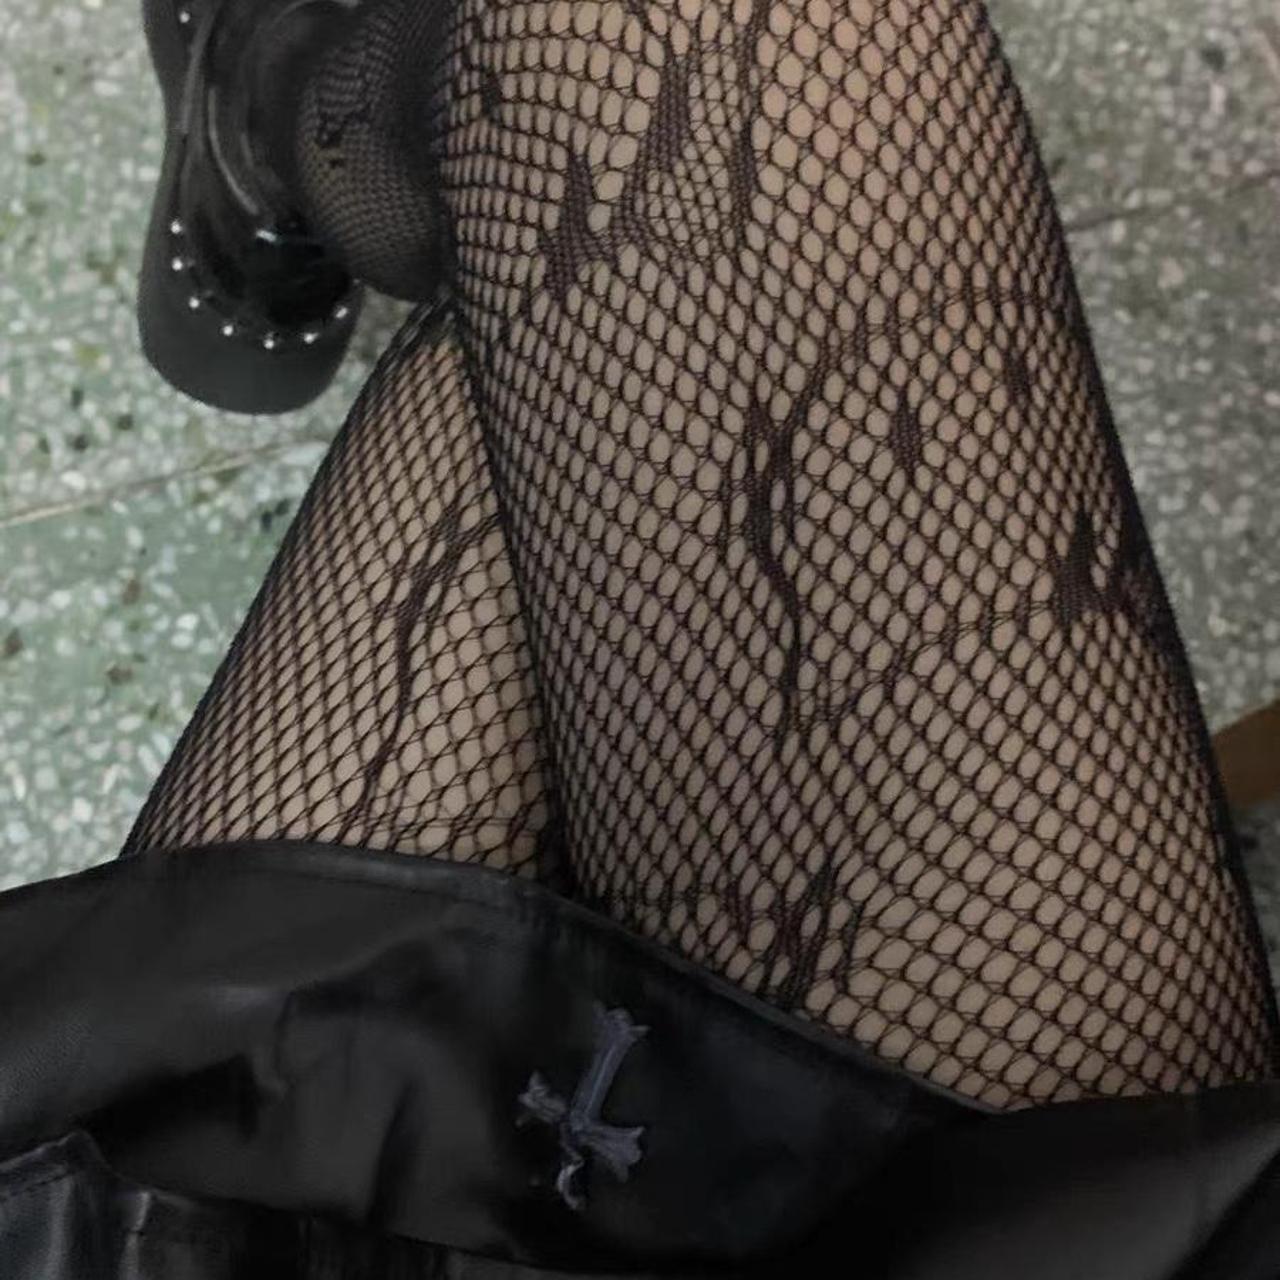 Vintage Hello Kitty Black Fishnet Stockings Tights Pantyhose. Petite Size:  O/S XS-Small NEW!! Still In Package! for Sale in Bellflower, CA - OfferUp